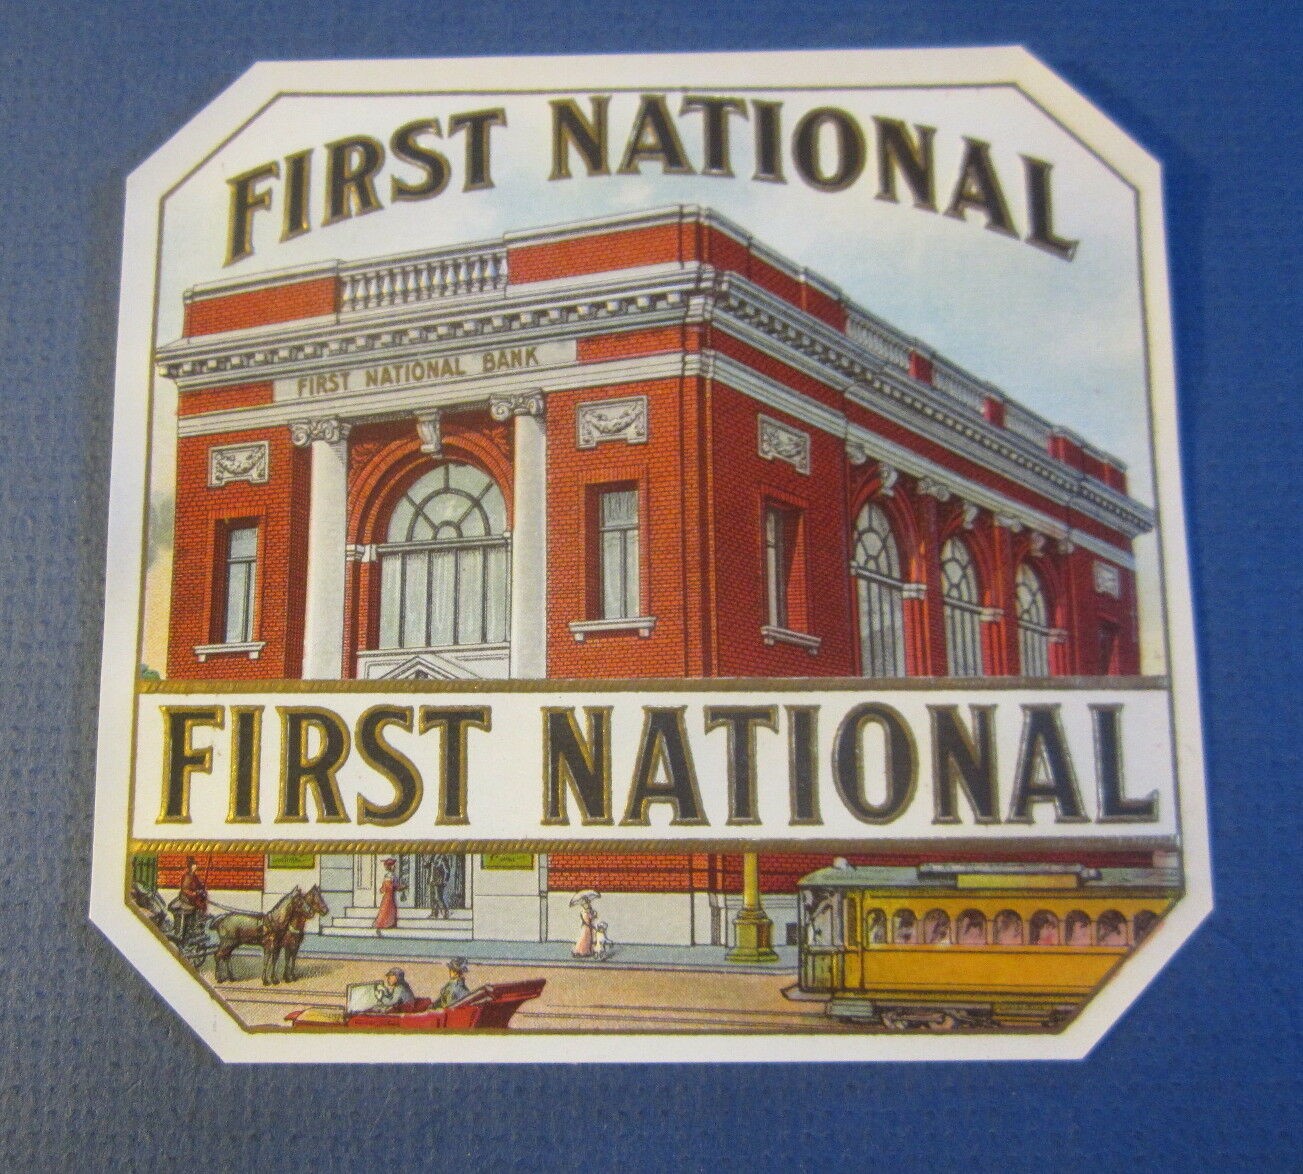  Old Antique - FIRST NATIONAL - Outer CIGAR Box...